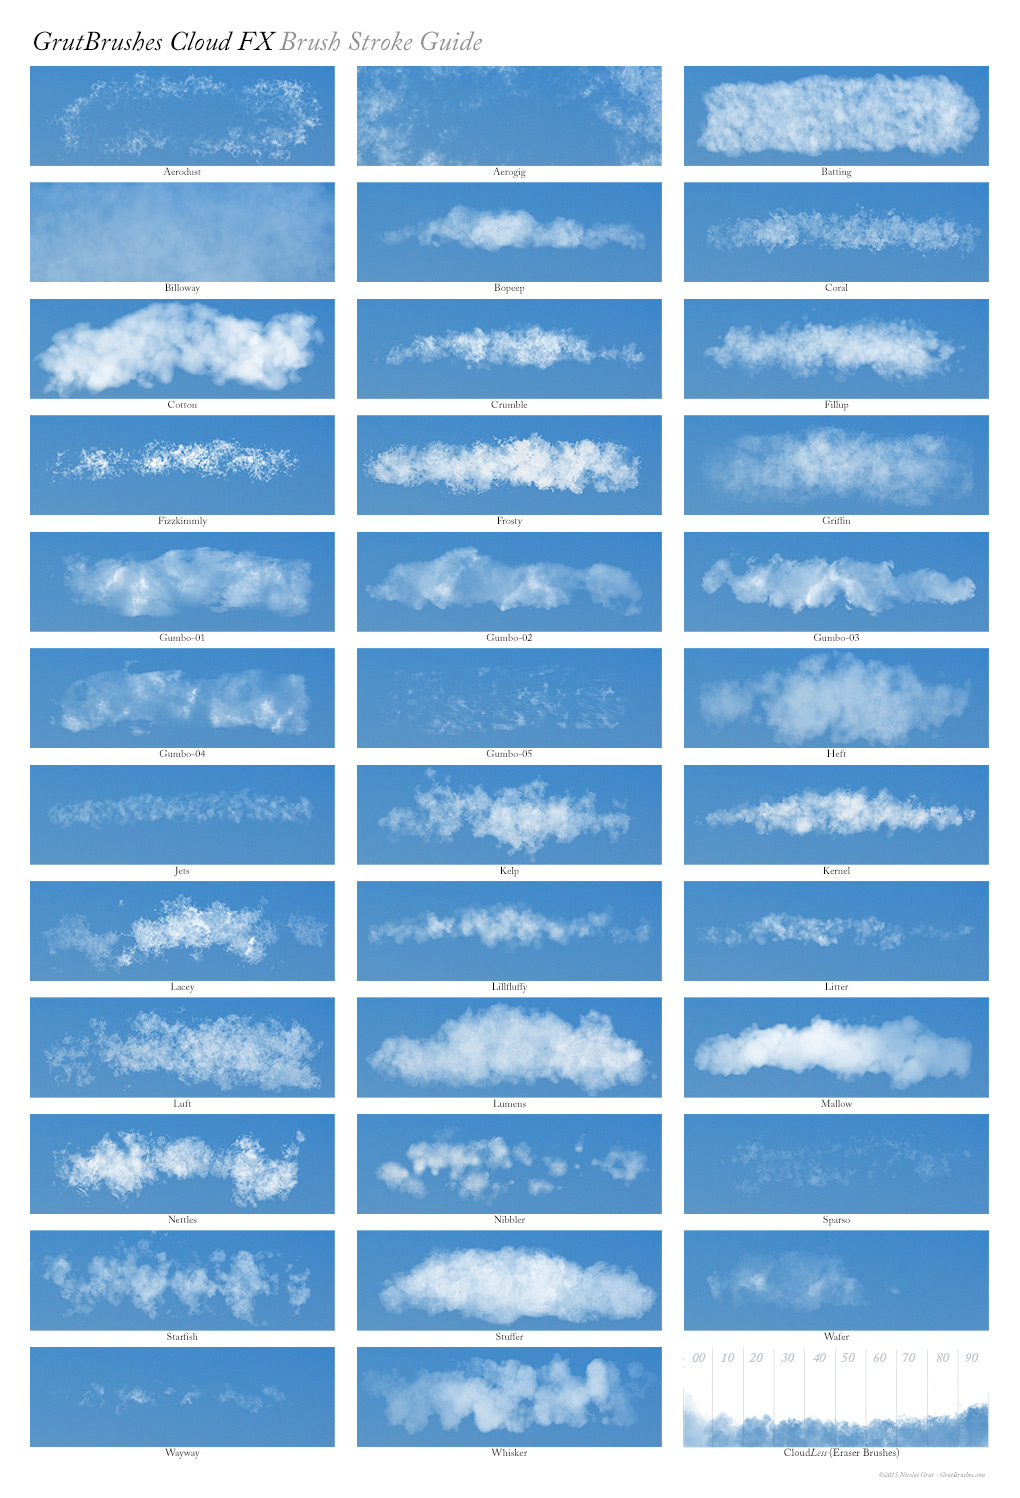 Choosing a brush for stippling clouds